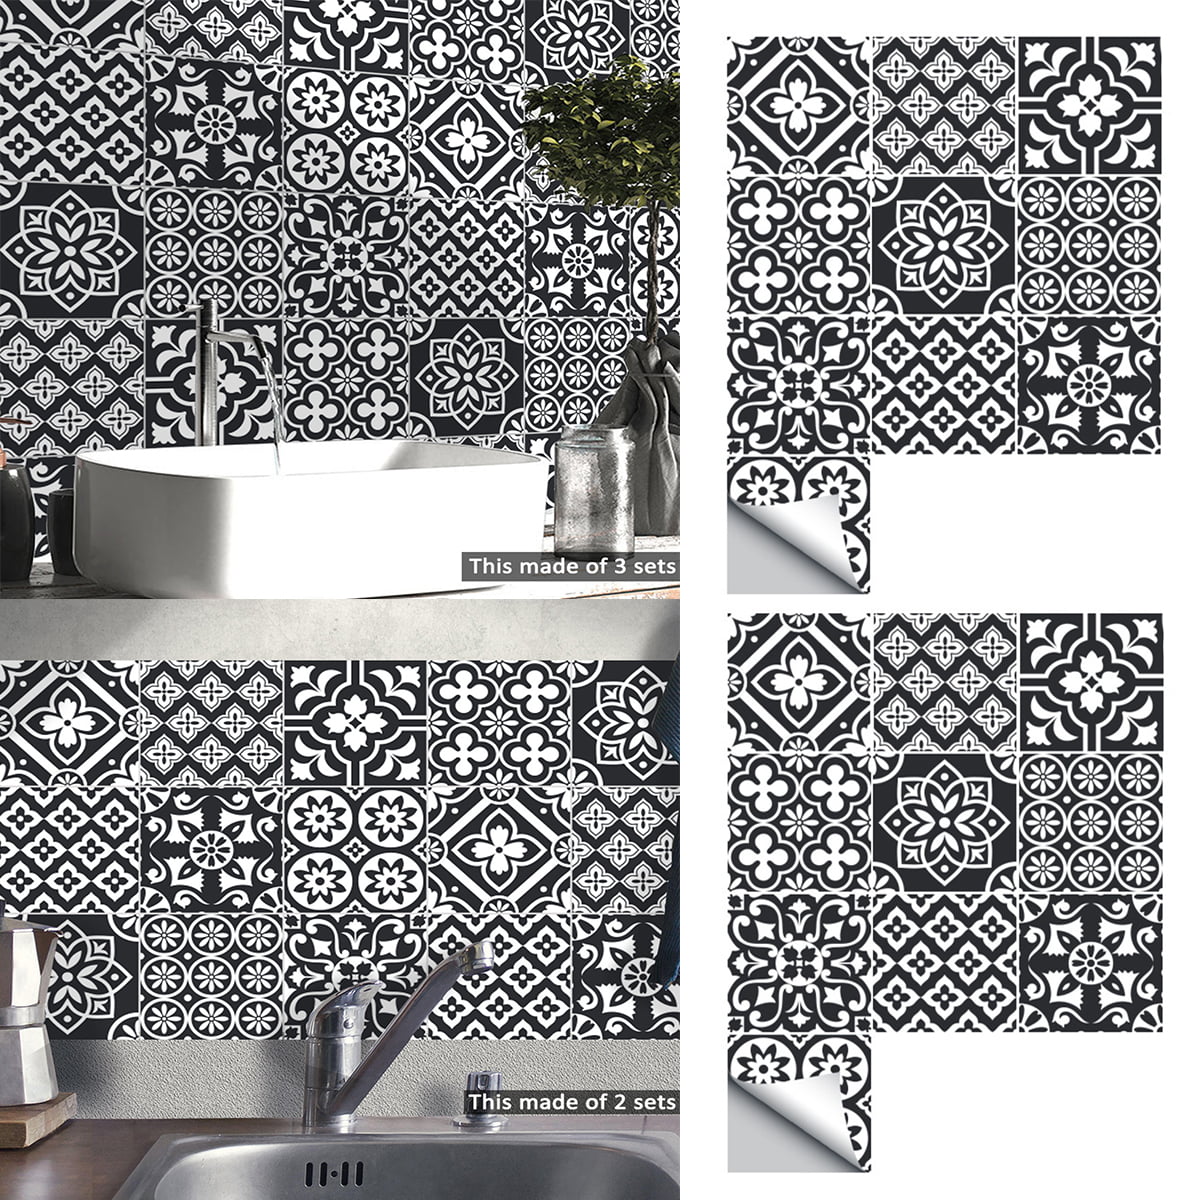 10pcs Vintage Tile Stickers Self-adhesive Waterproof Moroccan Mosaic Wall Decals 